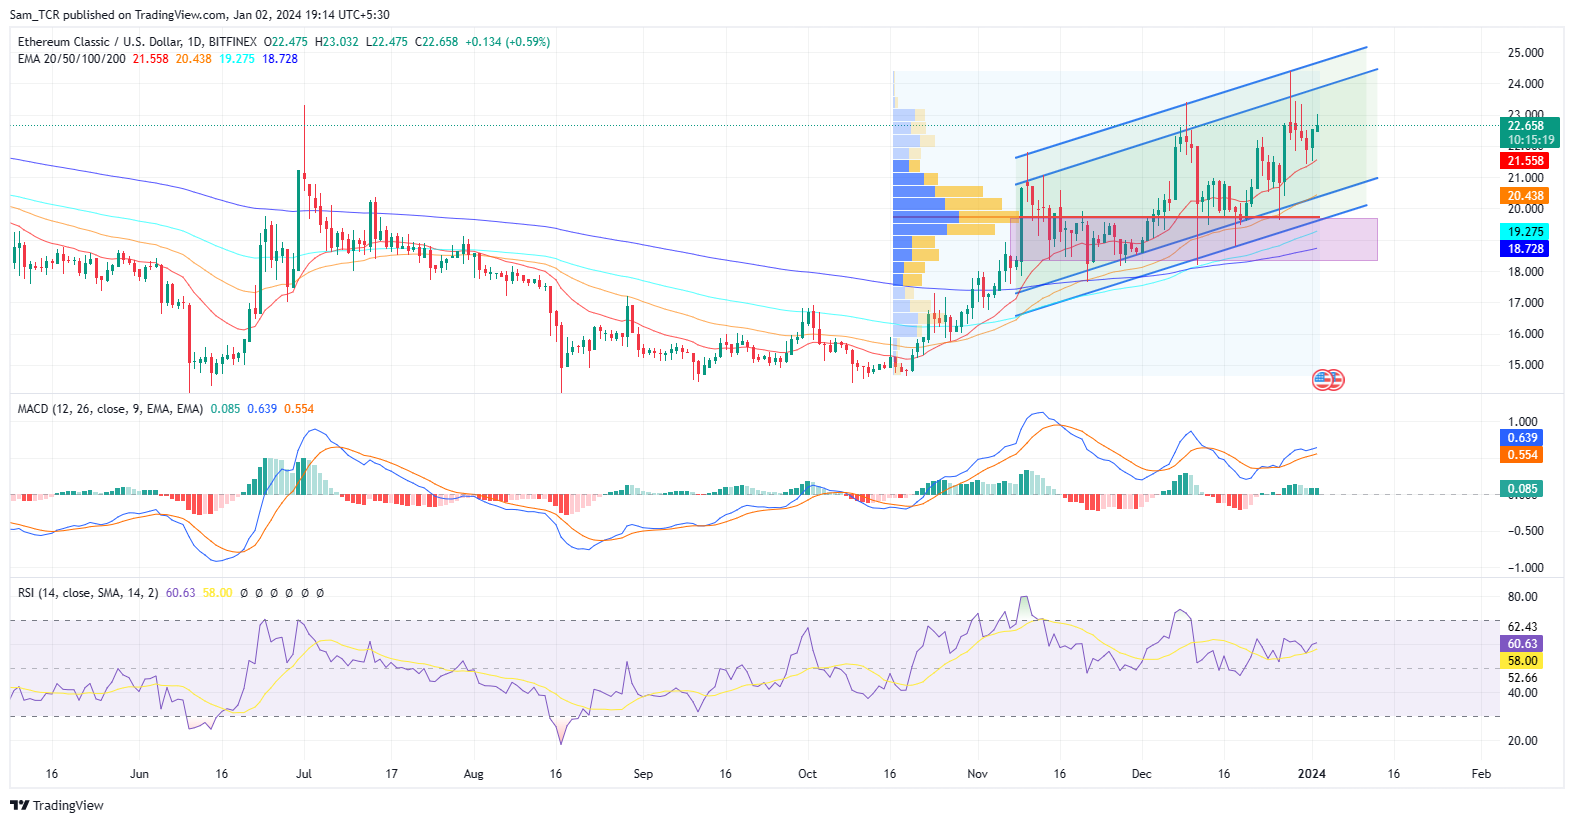 Ethereum Classic: Heading High in a Parallel Wedge, What’s Next?